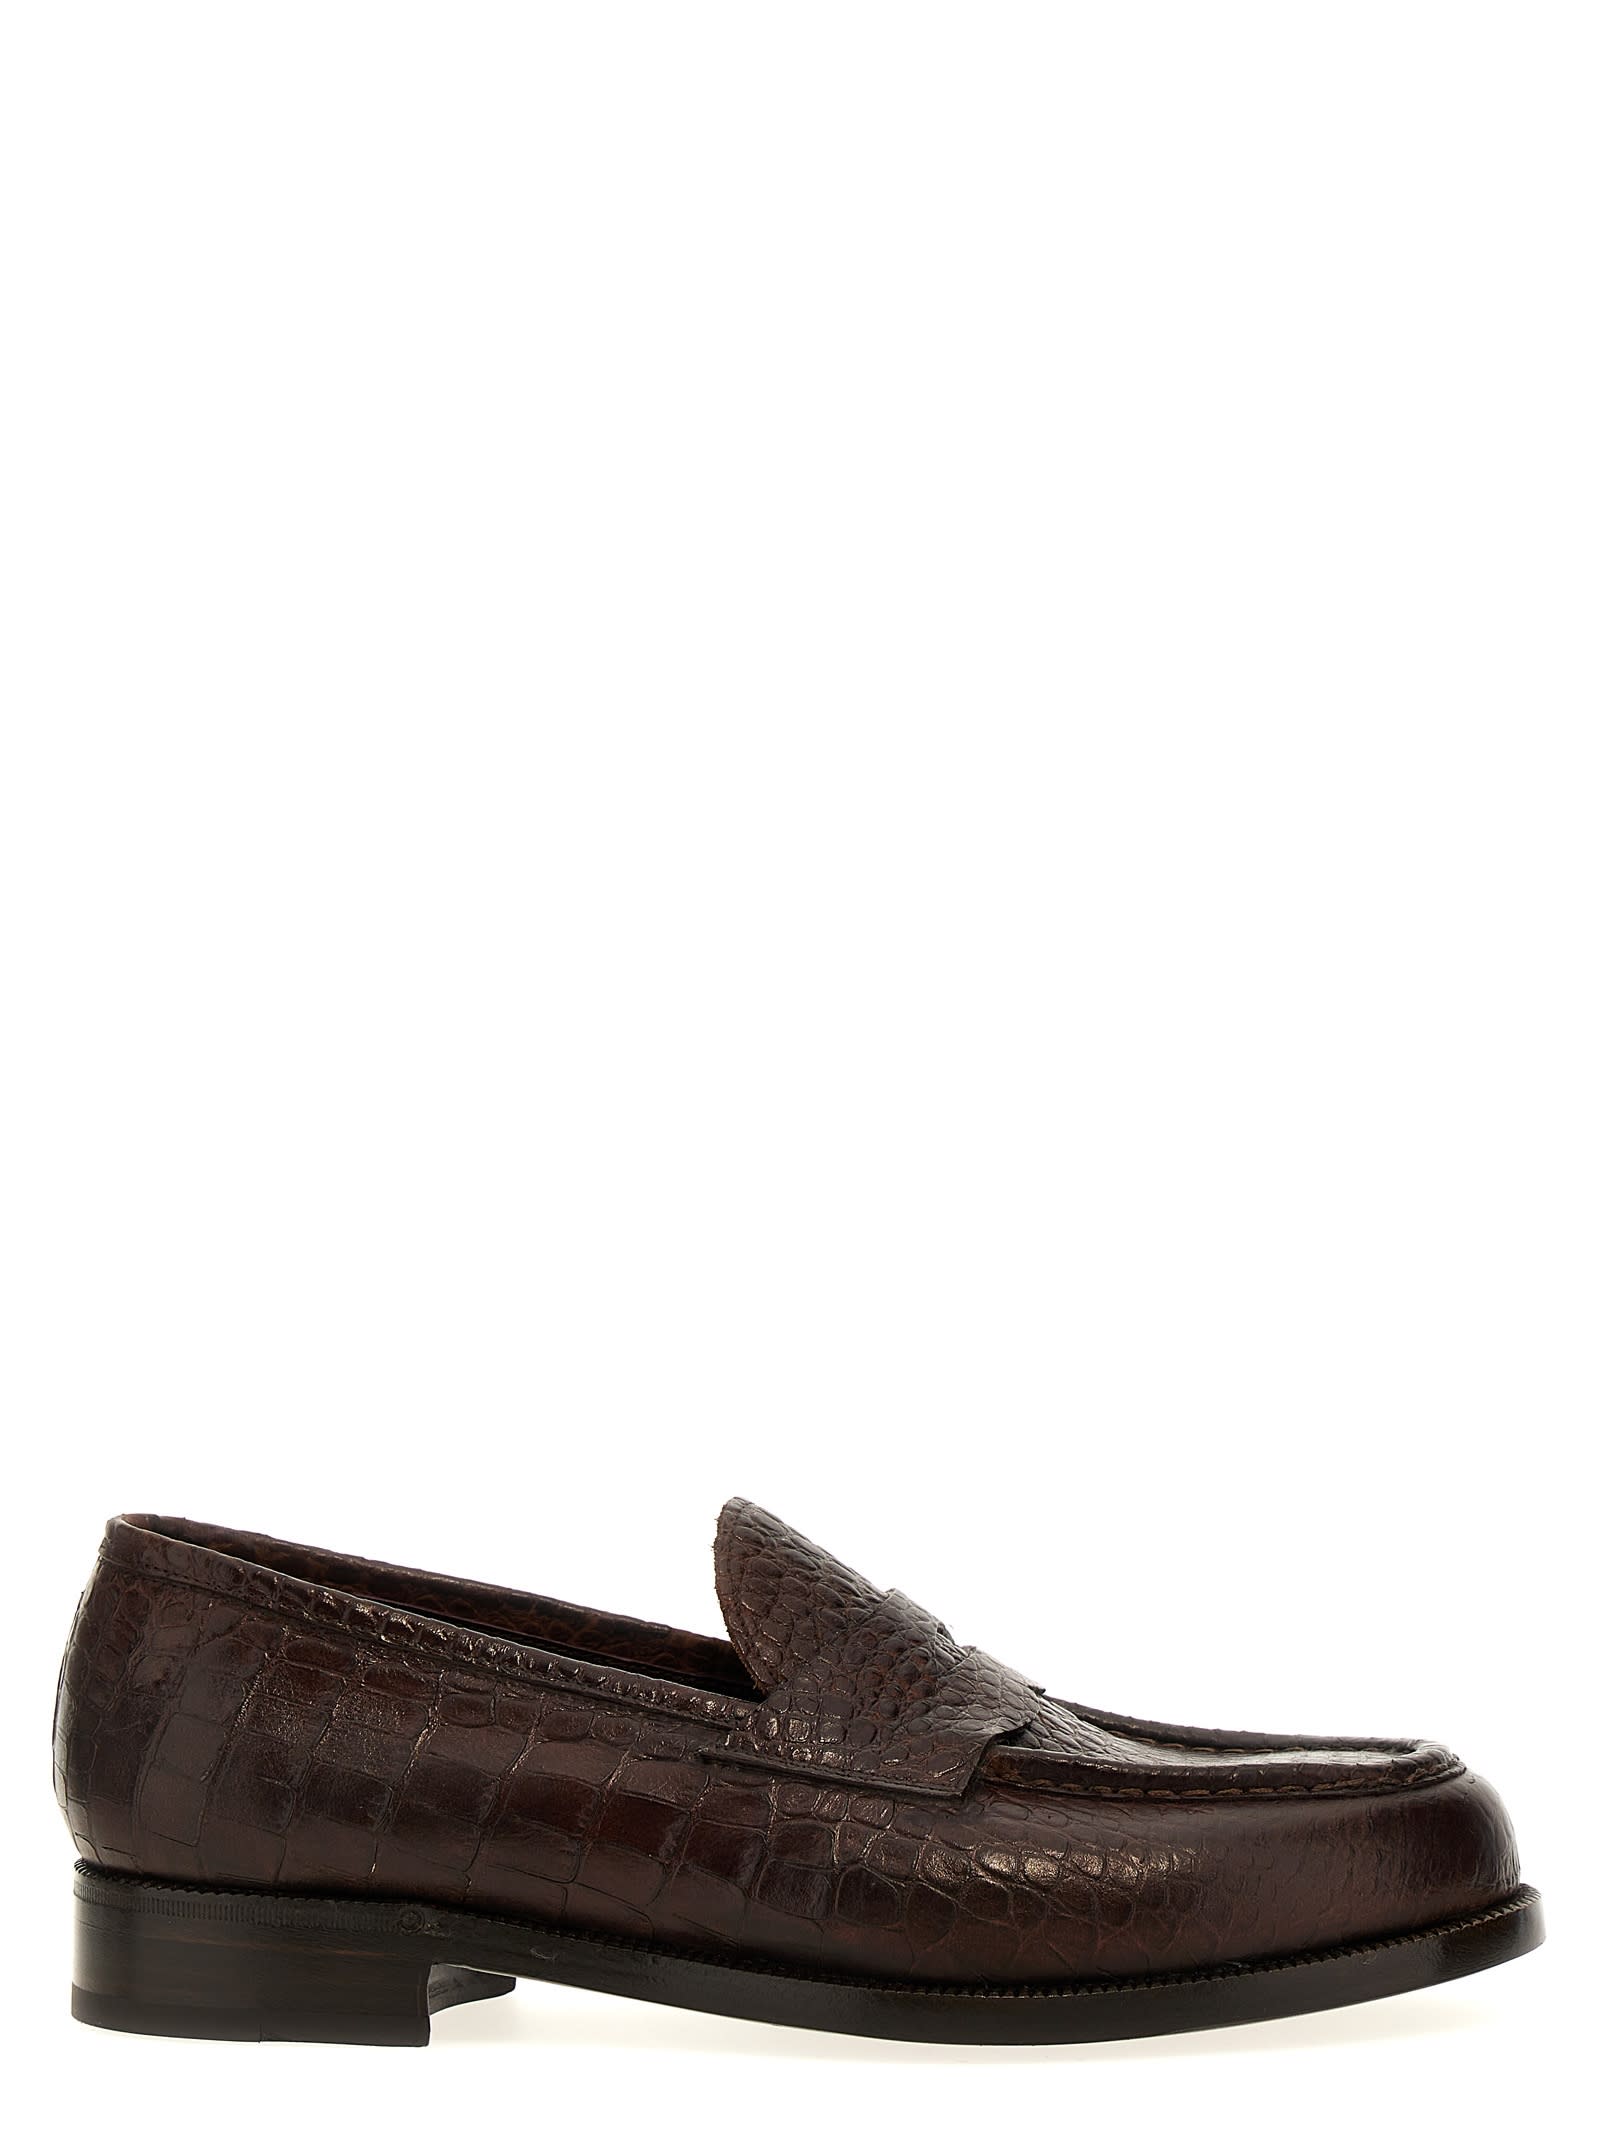 Croc Print Leather Loafers